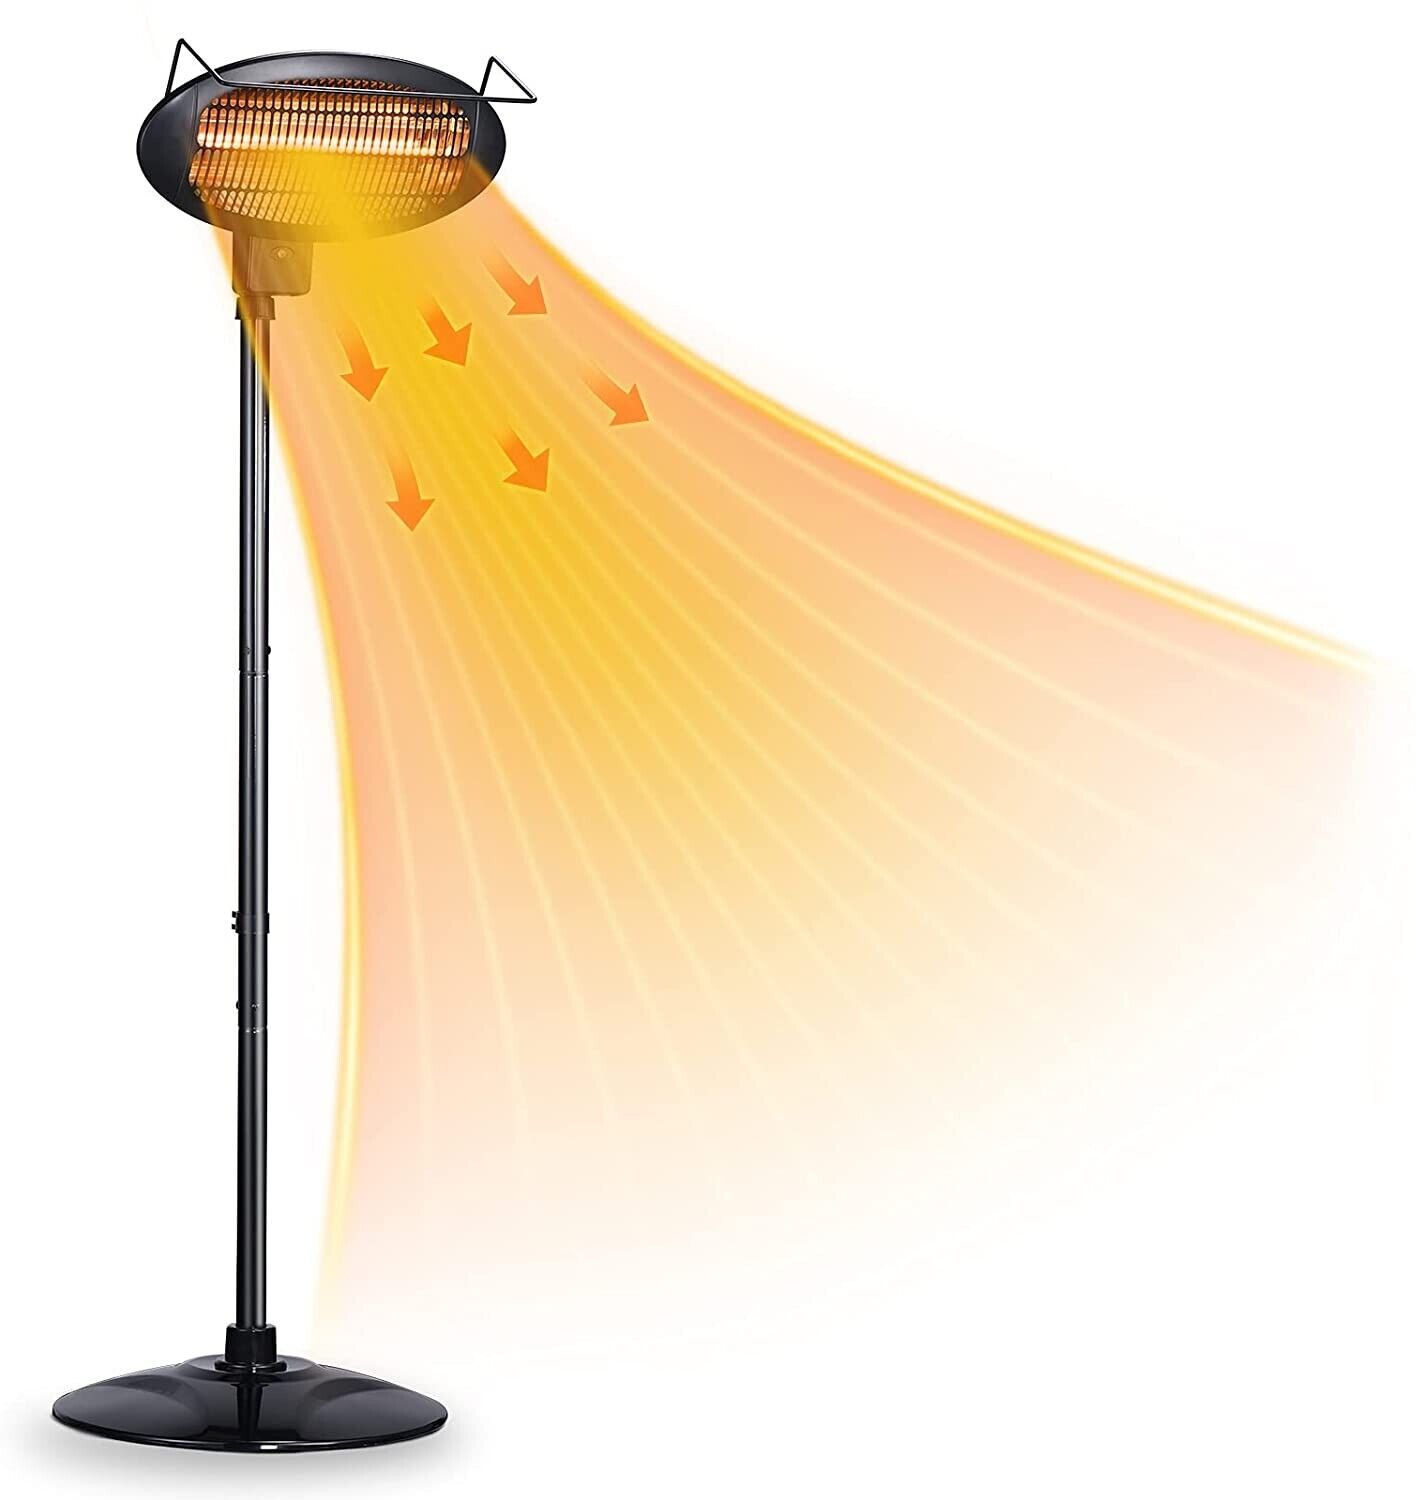 Infrared Electric Patio Heater, Portable Stand Heater,500w/1000w/1500w Adjusted